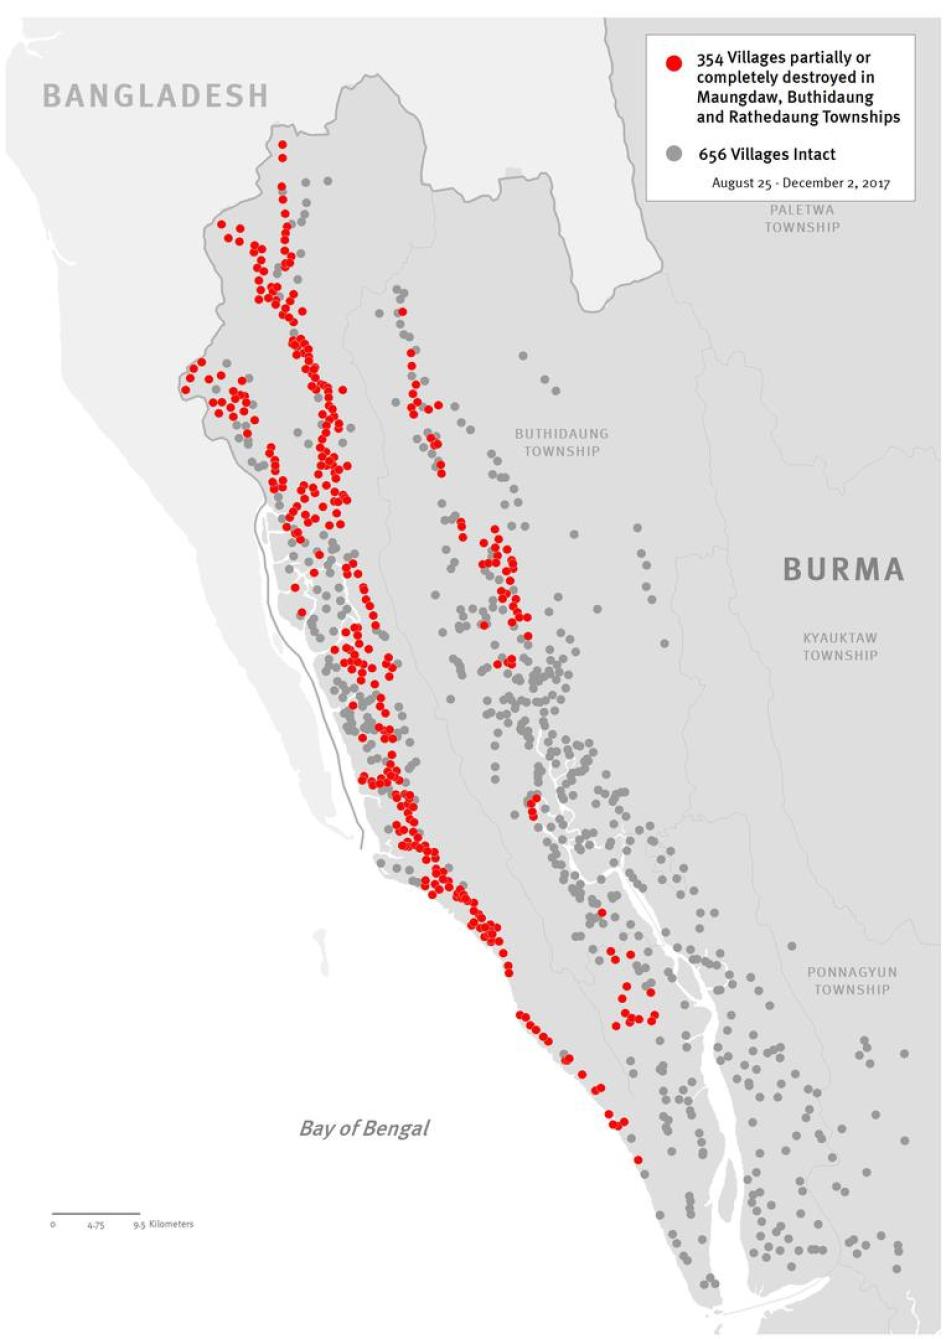 An updated map of destruction of Rohingya villages in northern Rakhine State during October and November 2017.